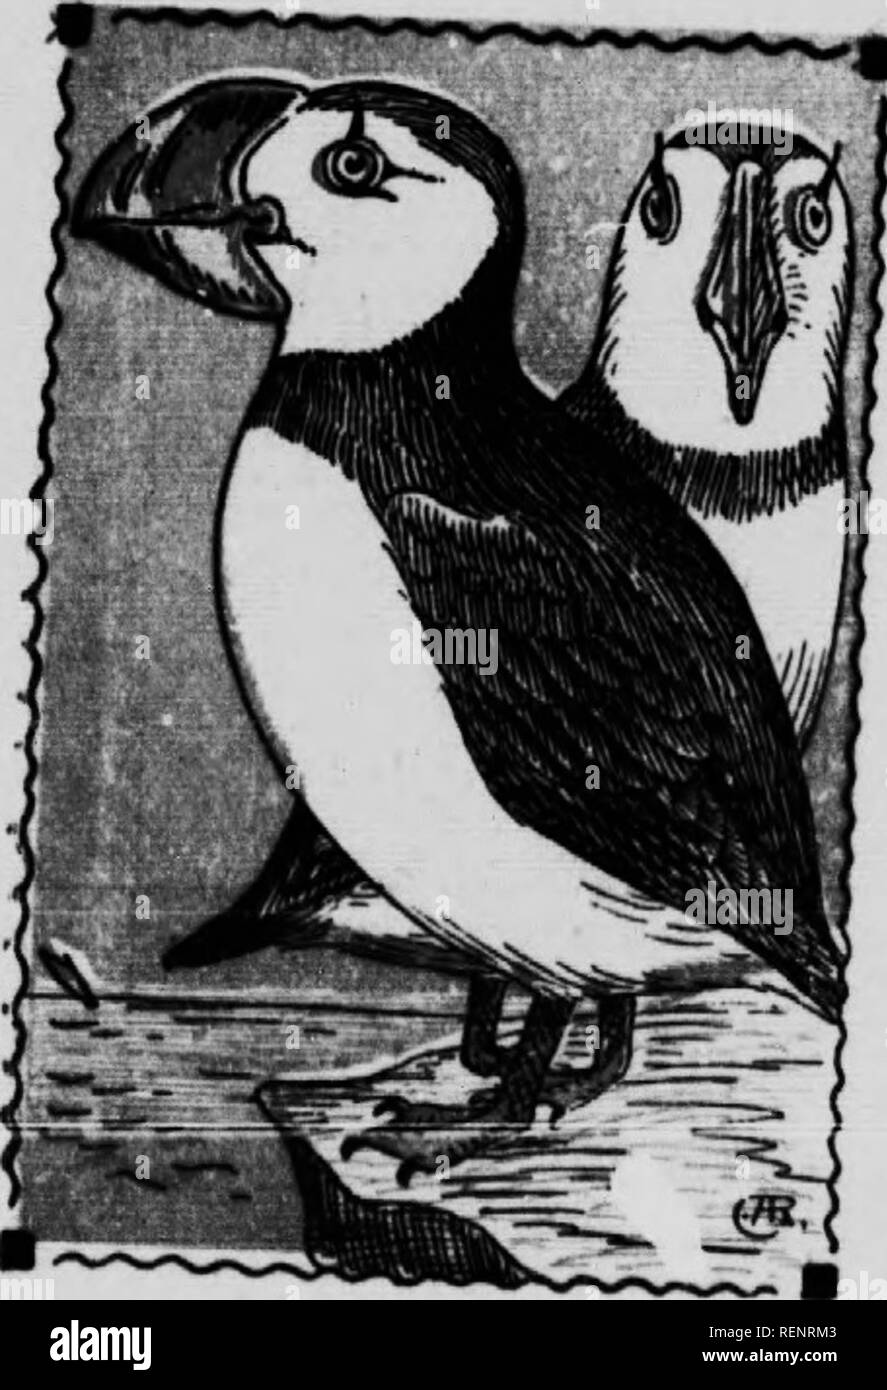 . Bird guide [microform]. Waterfowl; Birds; Gibier d'eau; Oiseaux. I AUKS, MURRE8 and PUFFINS-Famlly Alcldae. ,â PUFFIN; SEA PARROT. 13. Fratercula arctica. 13 Inches. leis&quot; sÂ°o1.t^lhfnrtfIf ^^1,&quot;^ appearing birds, with short legs stout bodies and very large but thin bills, that of the common Puffin being 2 iS. In length and aboSt the same In height; the bill Is highly colored with red and yellow, and the feet are red; eyes whUe If wm does &quot;not&quot; touch'th''&quot; &quot;i^&quot;&quot;&quot;'^^ bal^d &quot;across the thr^a H?f u *.Â°'J5'L*'*Â® '='&quot;&quot;â t*i's dlstlngu  Stock Photo